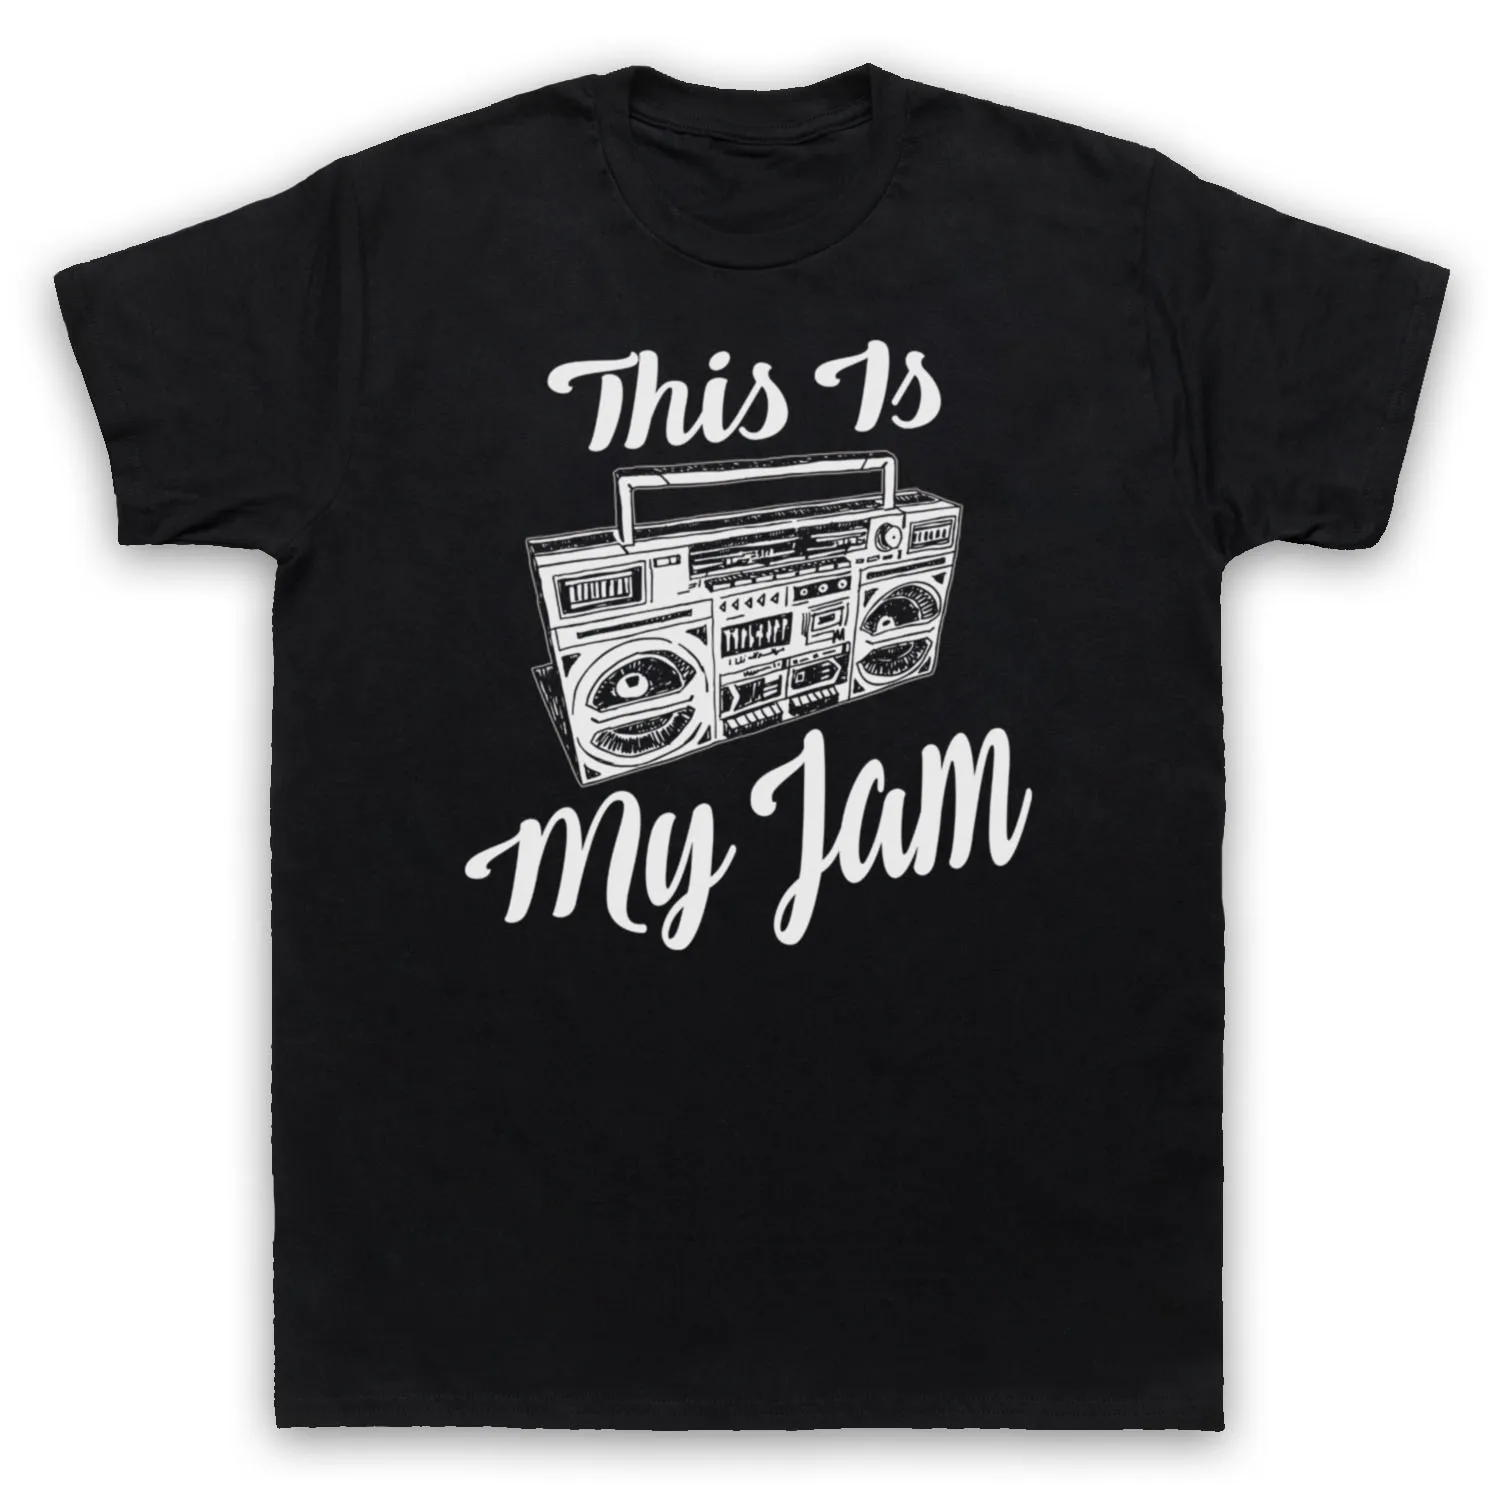 

This Is My Jam. Favourite Song Tune Music Slogan T-Shirt. Summer Cotton Short Sleeve O-Neck Men's T Shirt New S-3XL